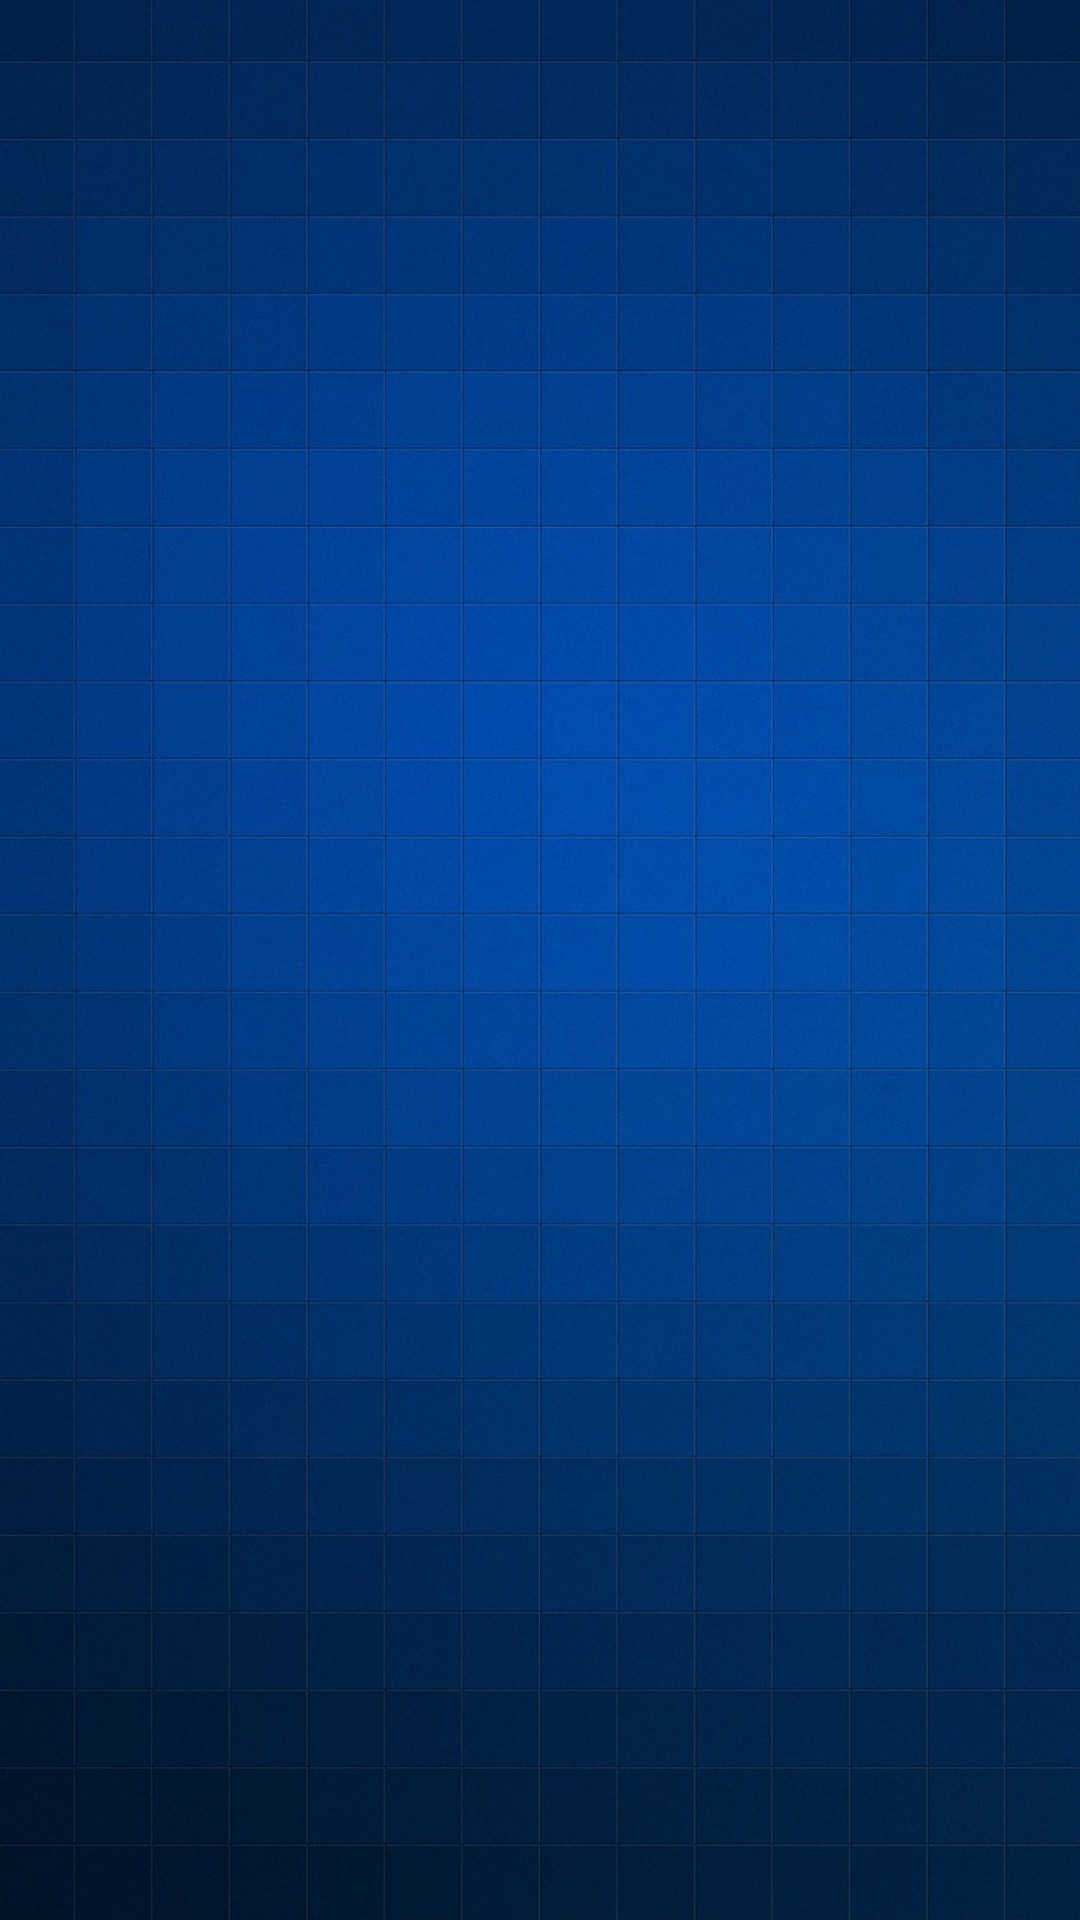 1080x1920 iphone 6s wallpapers hd Blue Abstract iPhone 6s Wallpapers HD